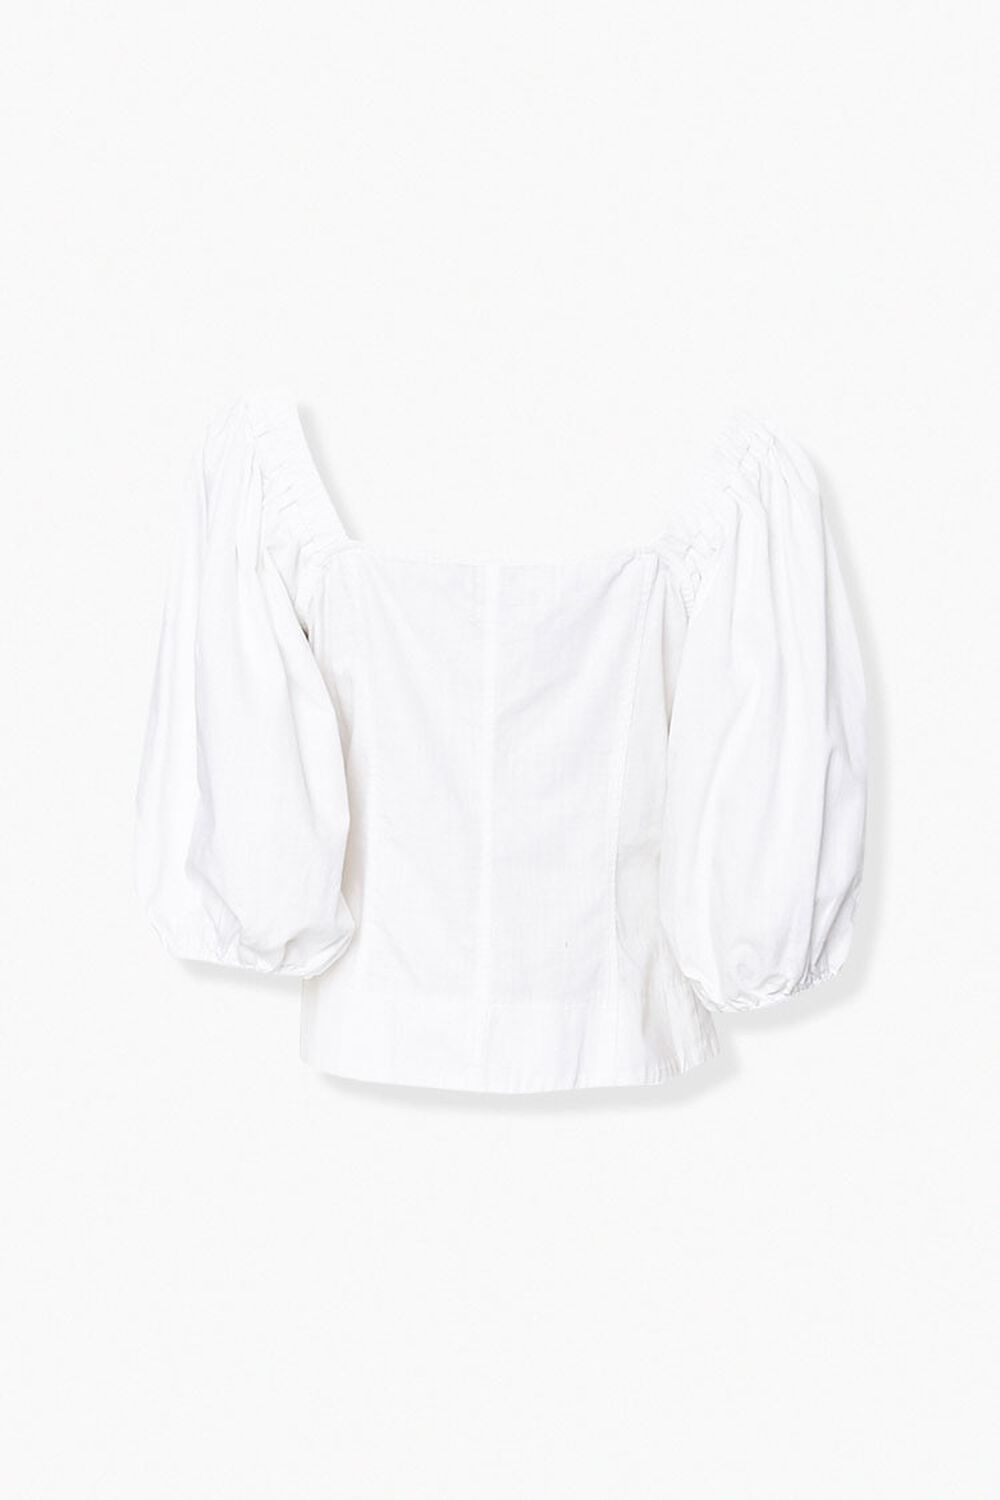 WHITE Chambray Peasant-Sleeve Top, image 2